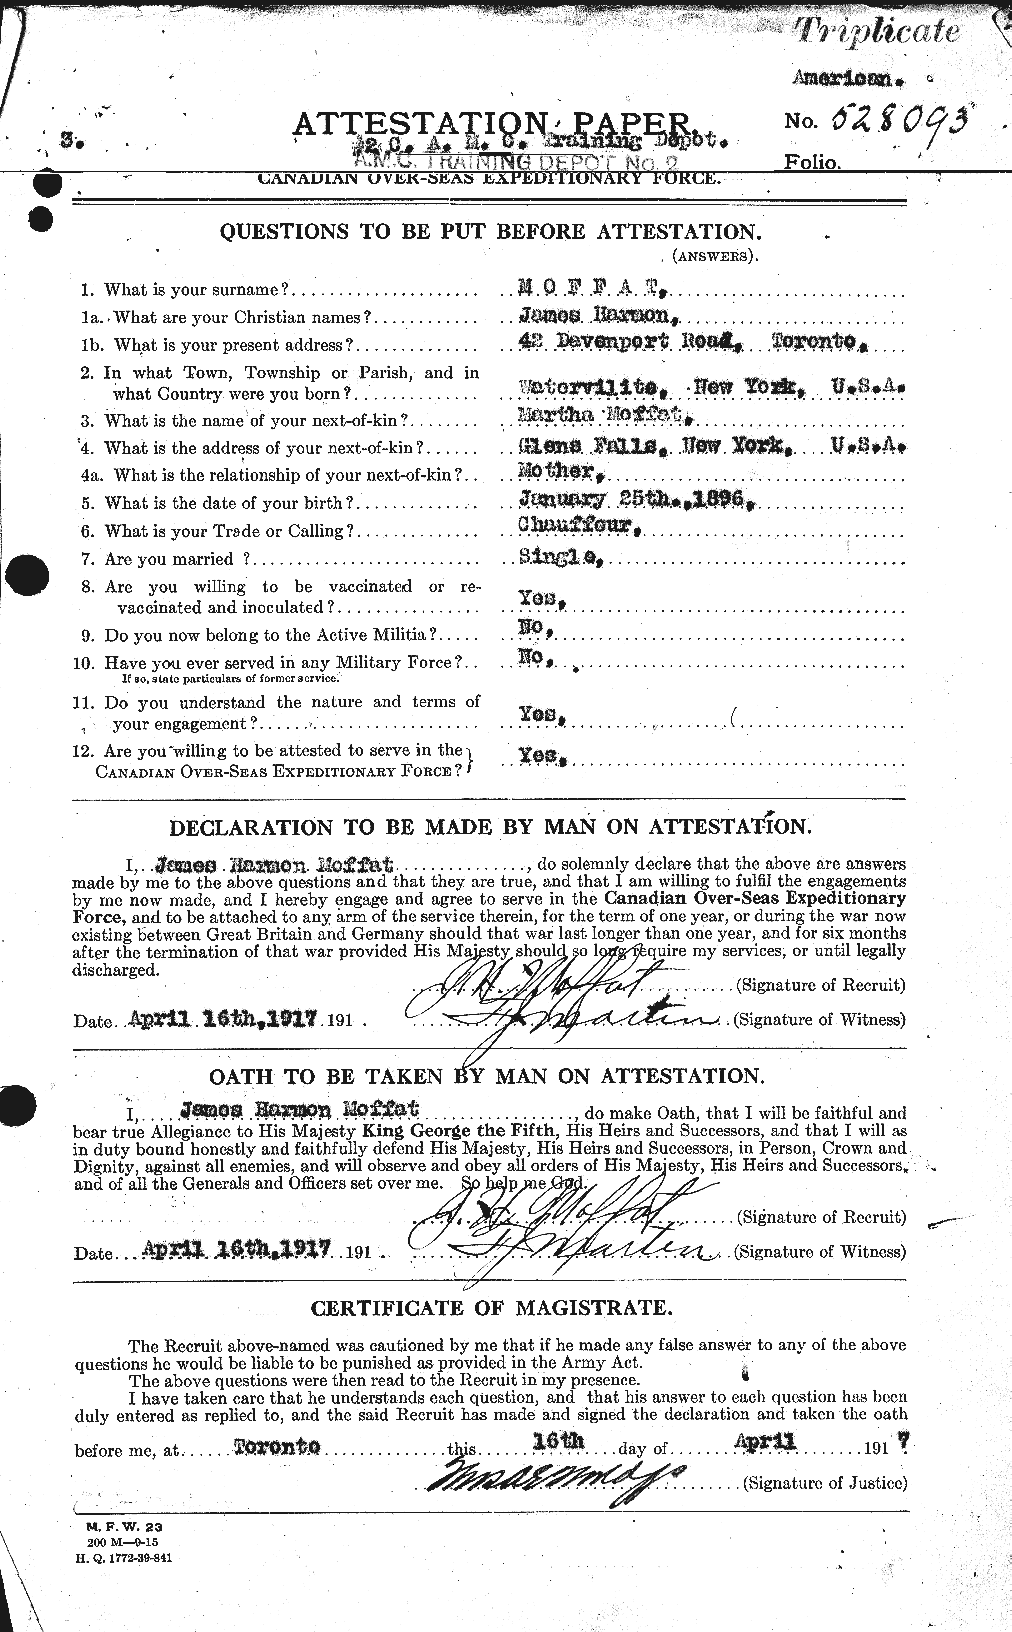 Personnel Records of the First World War - CEF 499036a